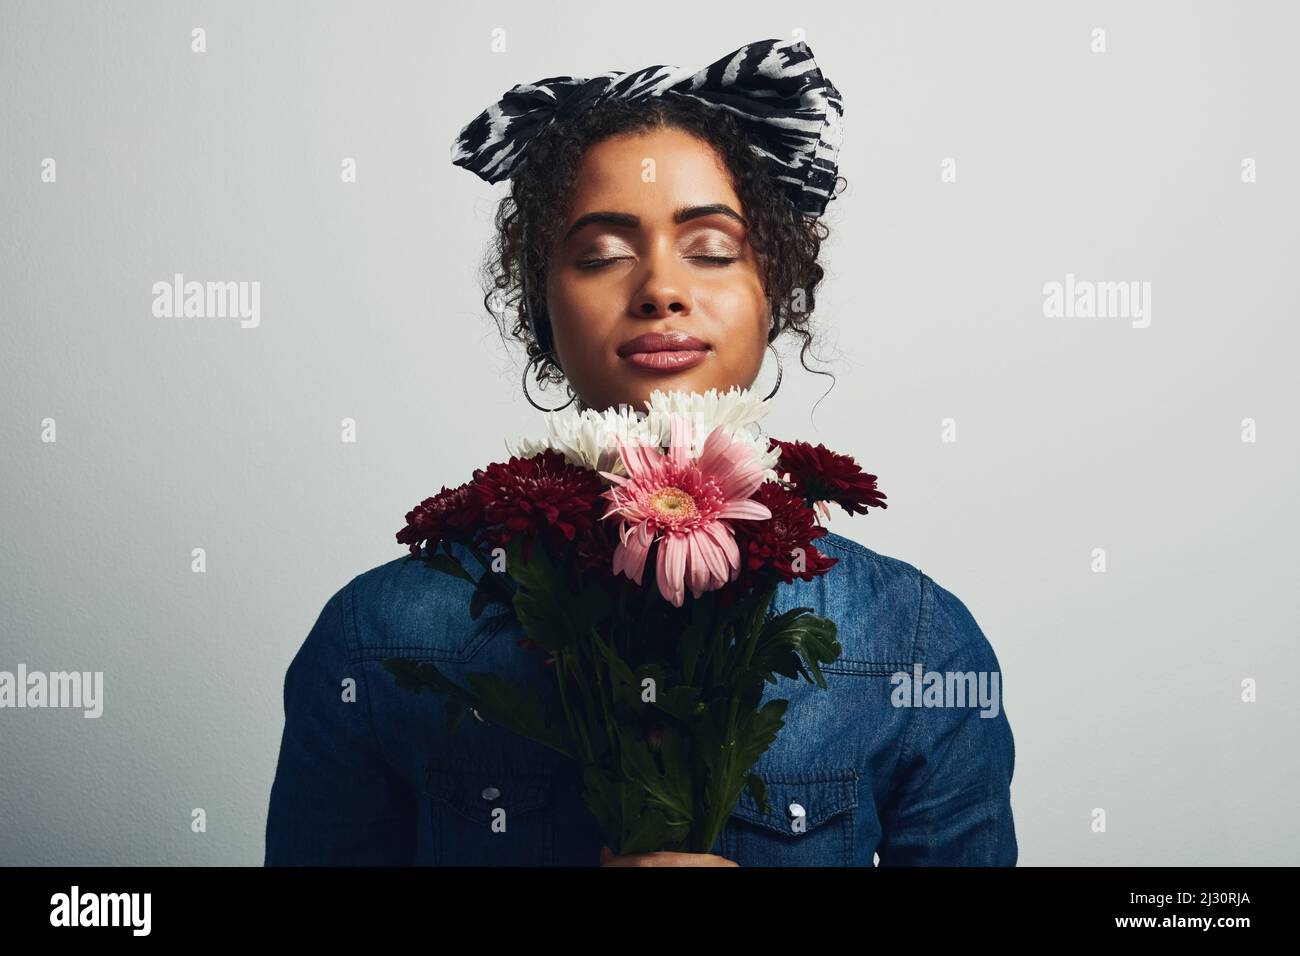 The sweet smell of flowers calms me. Studio shot of an attractive young woman holding a bunch of flowers against a grey background. Stock Photo